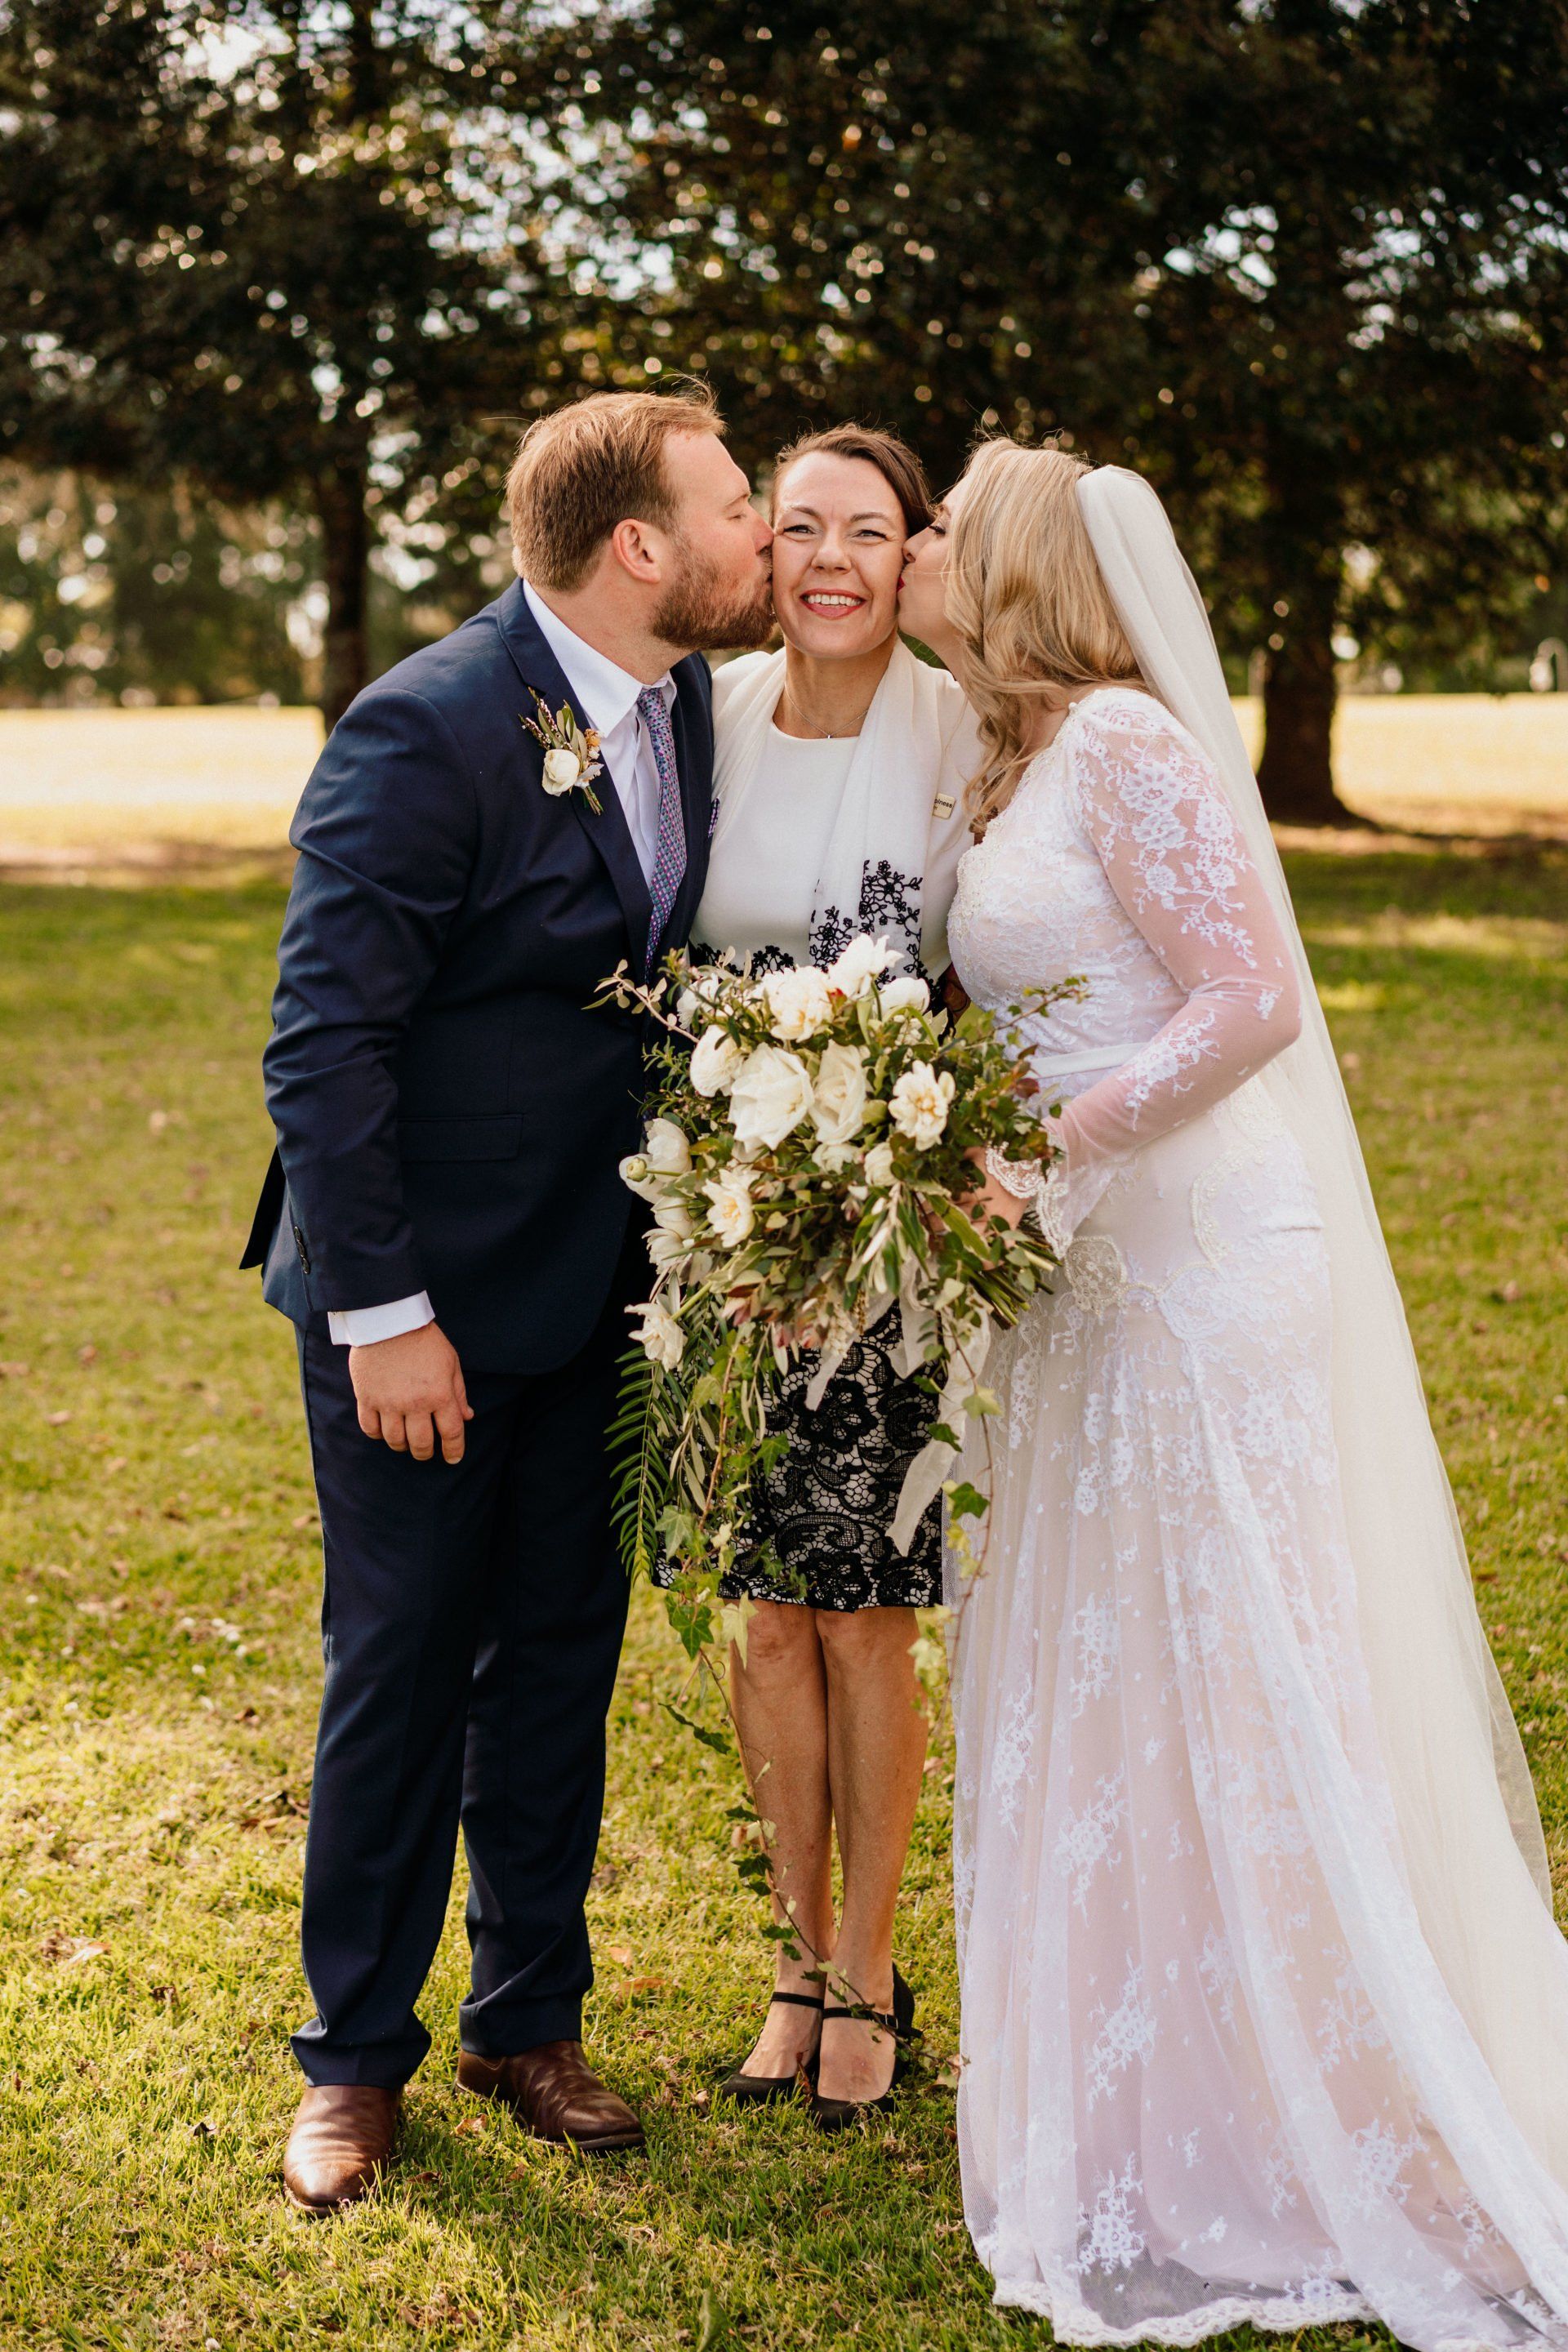 bride in white with veil and groom in blue suit kissing celebrant wearing black and white